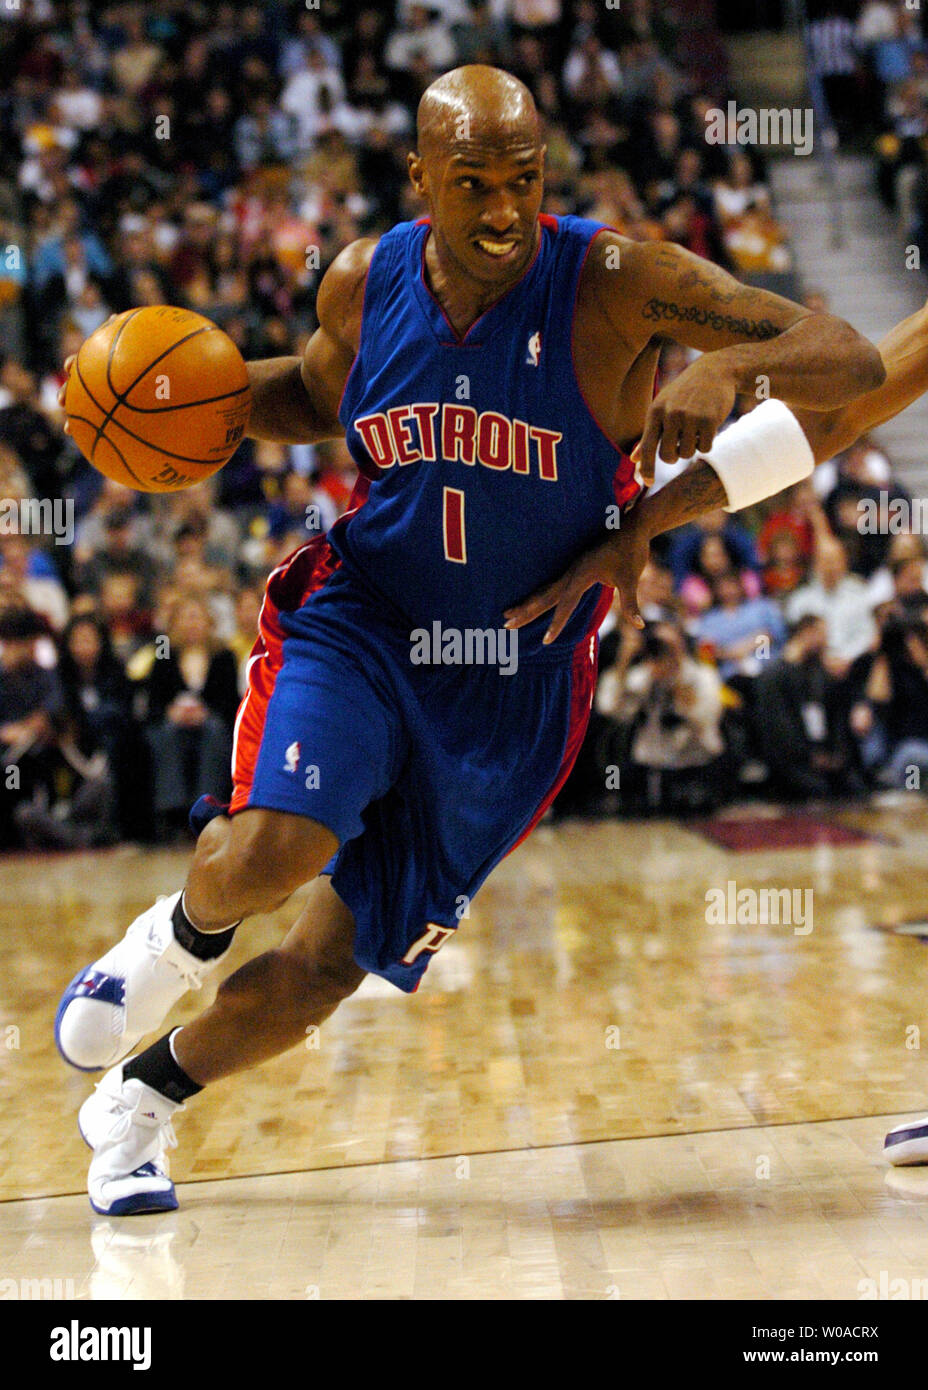 Detroit Pistons Chauncey Billups Drives The Ball Into The Paint In First Quarter Action Against The Toronto Raptors At The Air Canada Center On March 15 2006 In Toronto Canada Billups Led